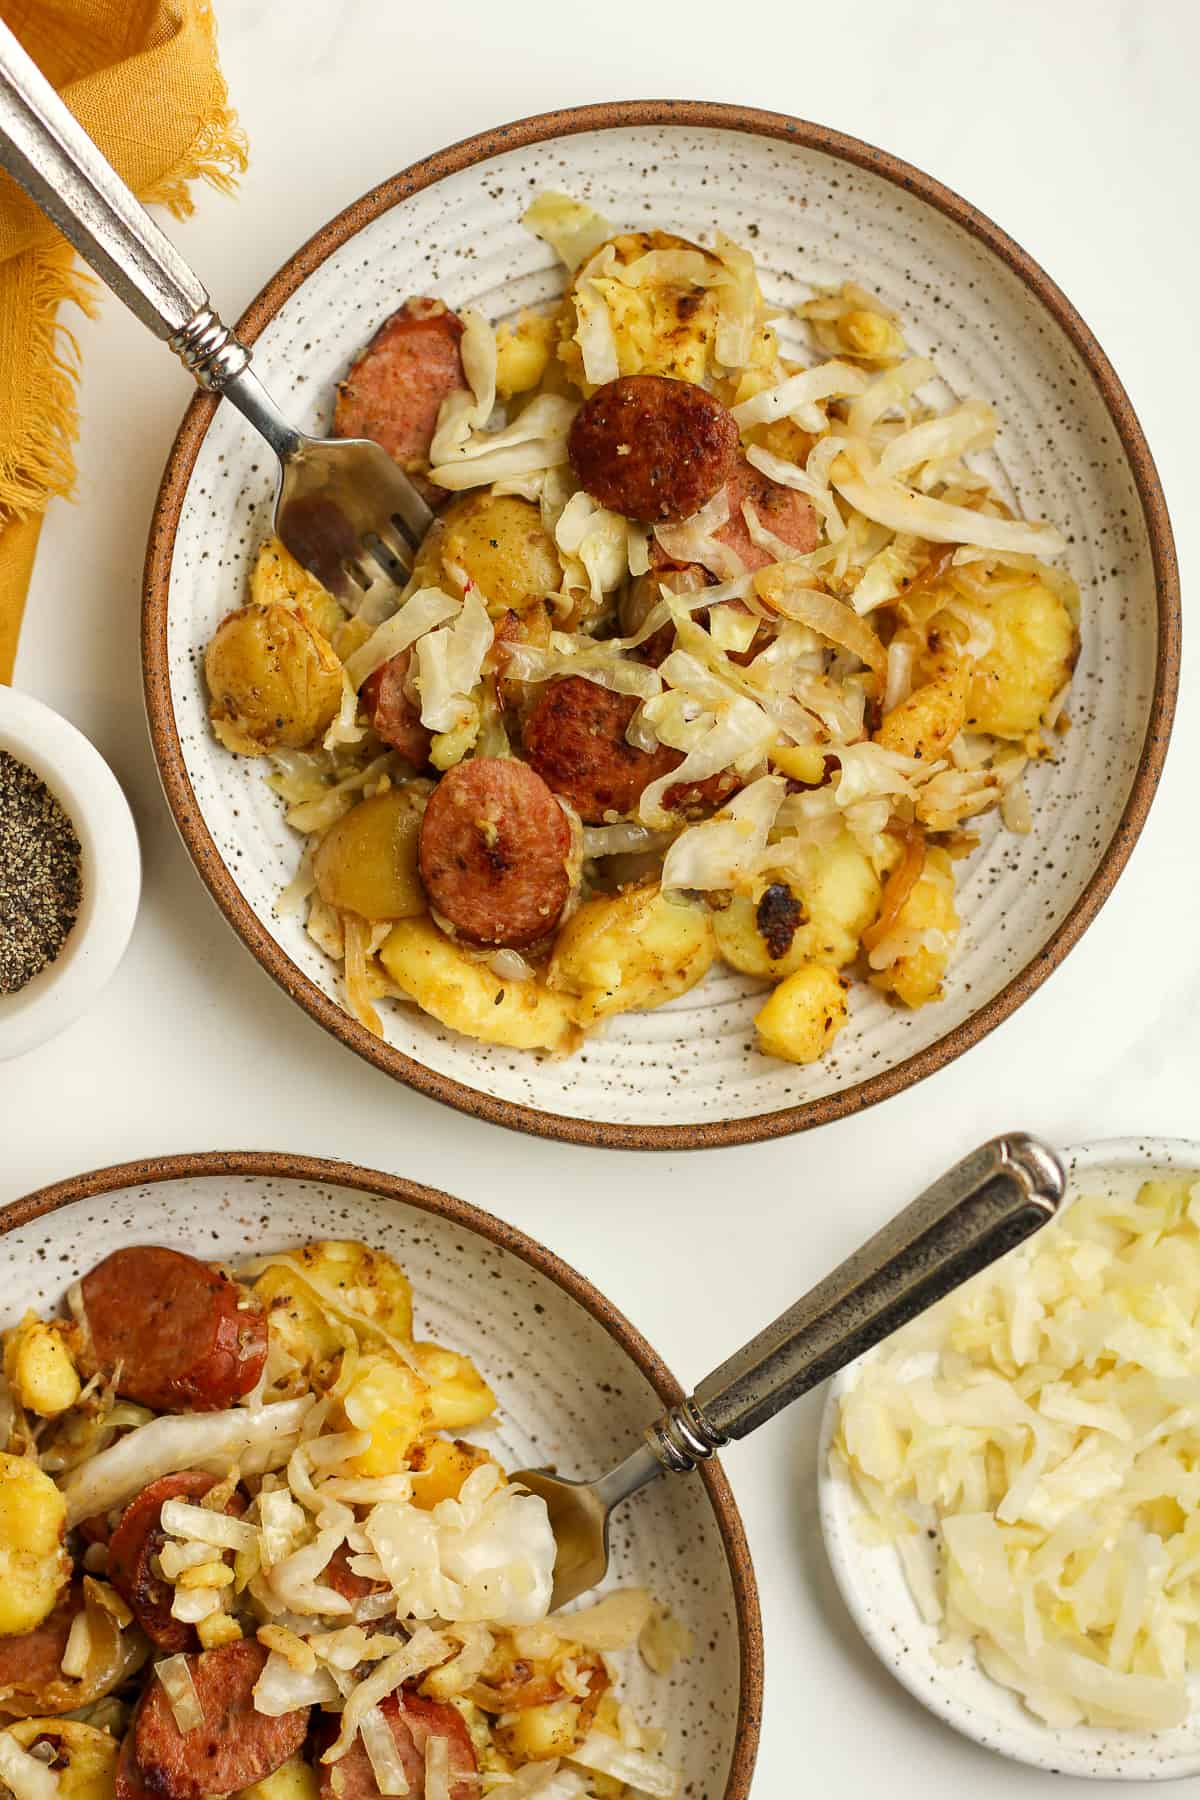 Two bowls of the sausage and sauerkraut skillet, with forks.